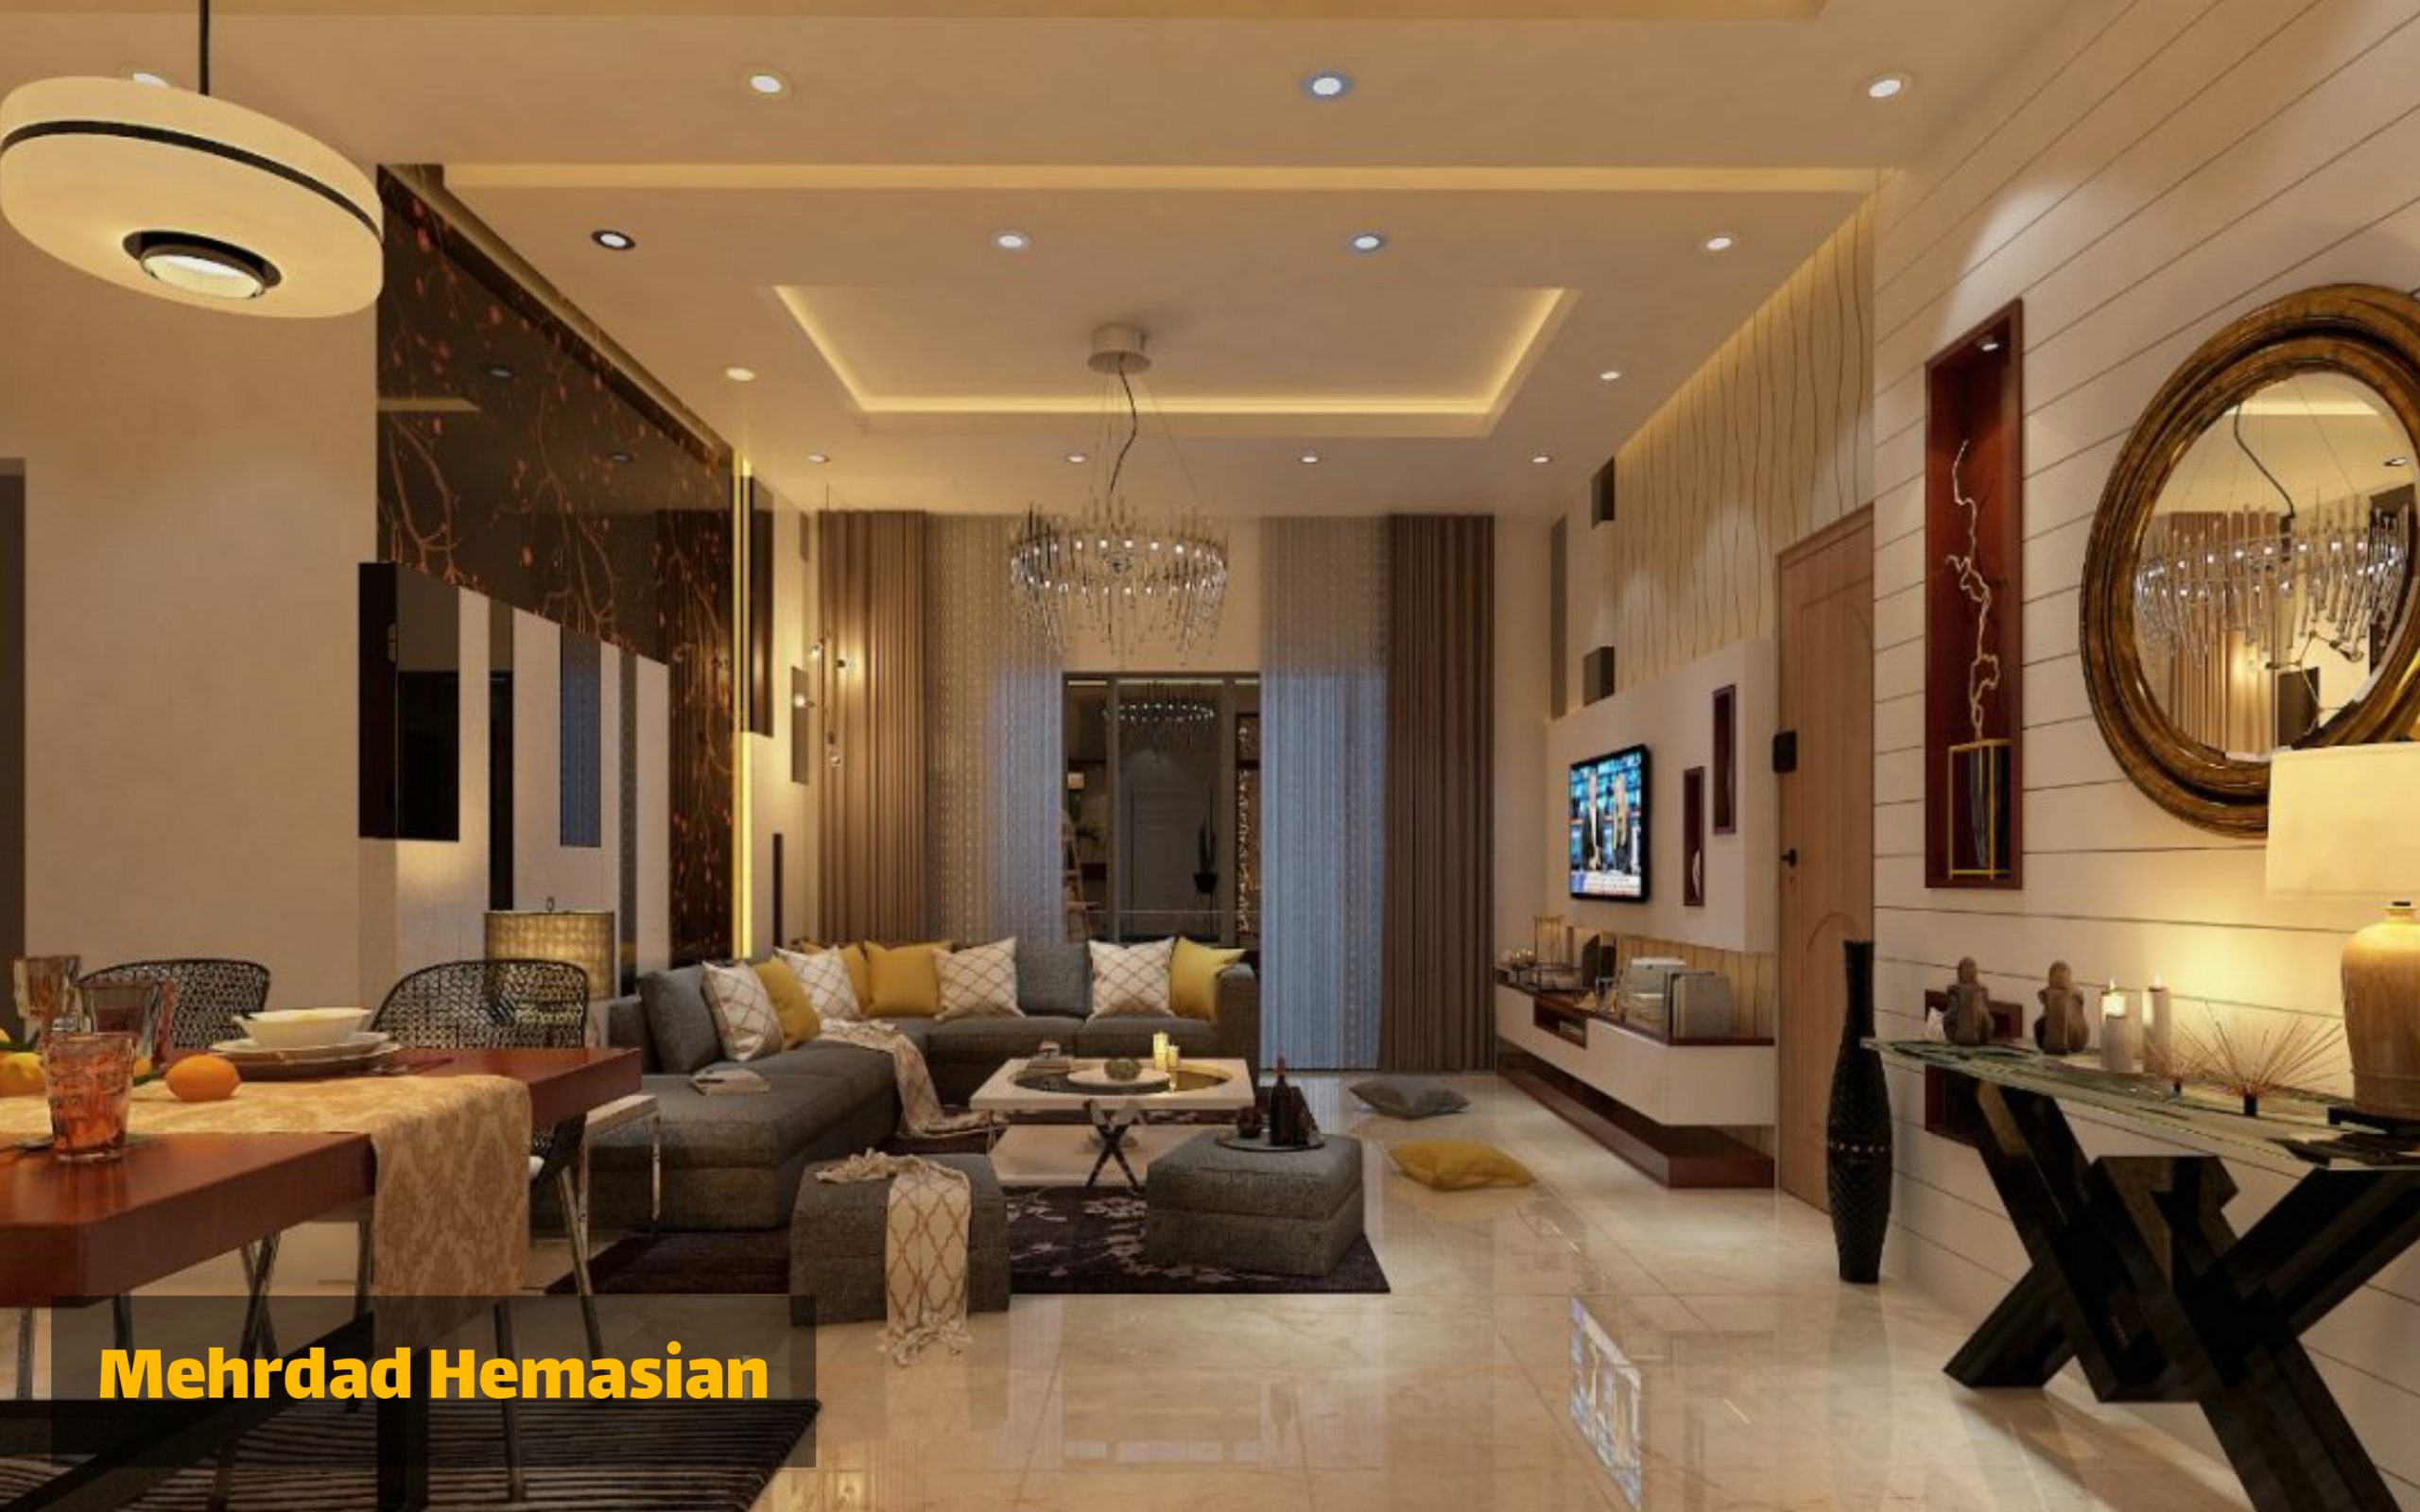 The importance of building facilities in the implementation of home interior decoration